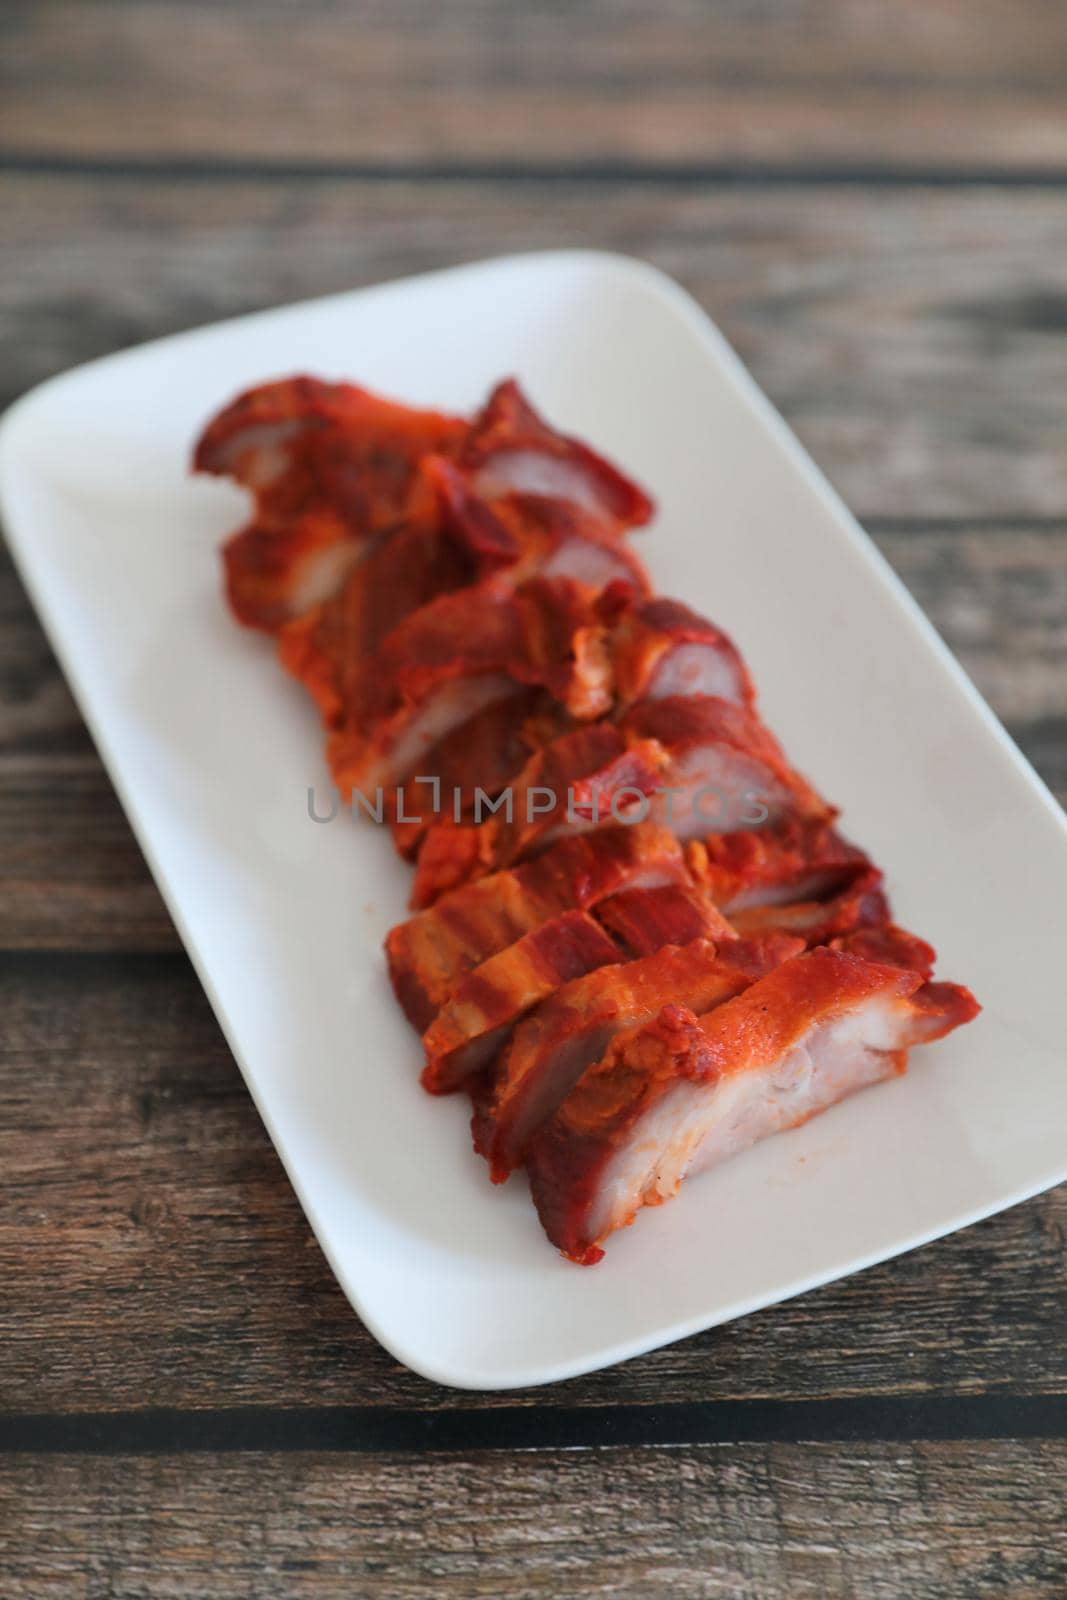 Roasted pork thai local food with red sauce on wood background by piyato